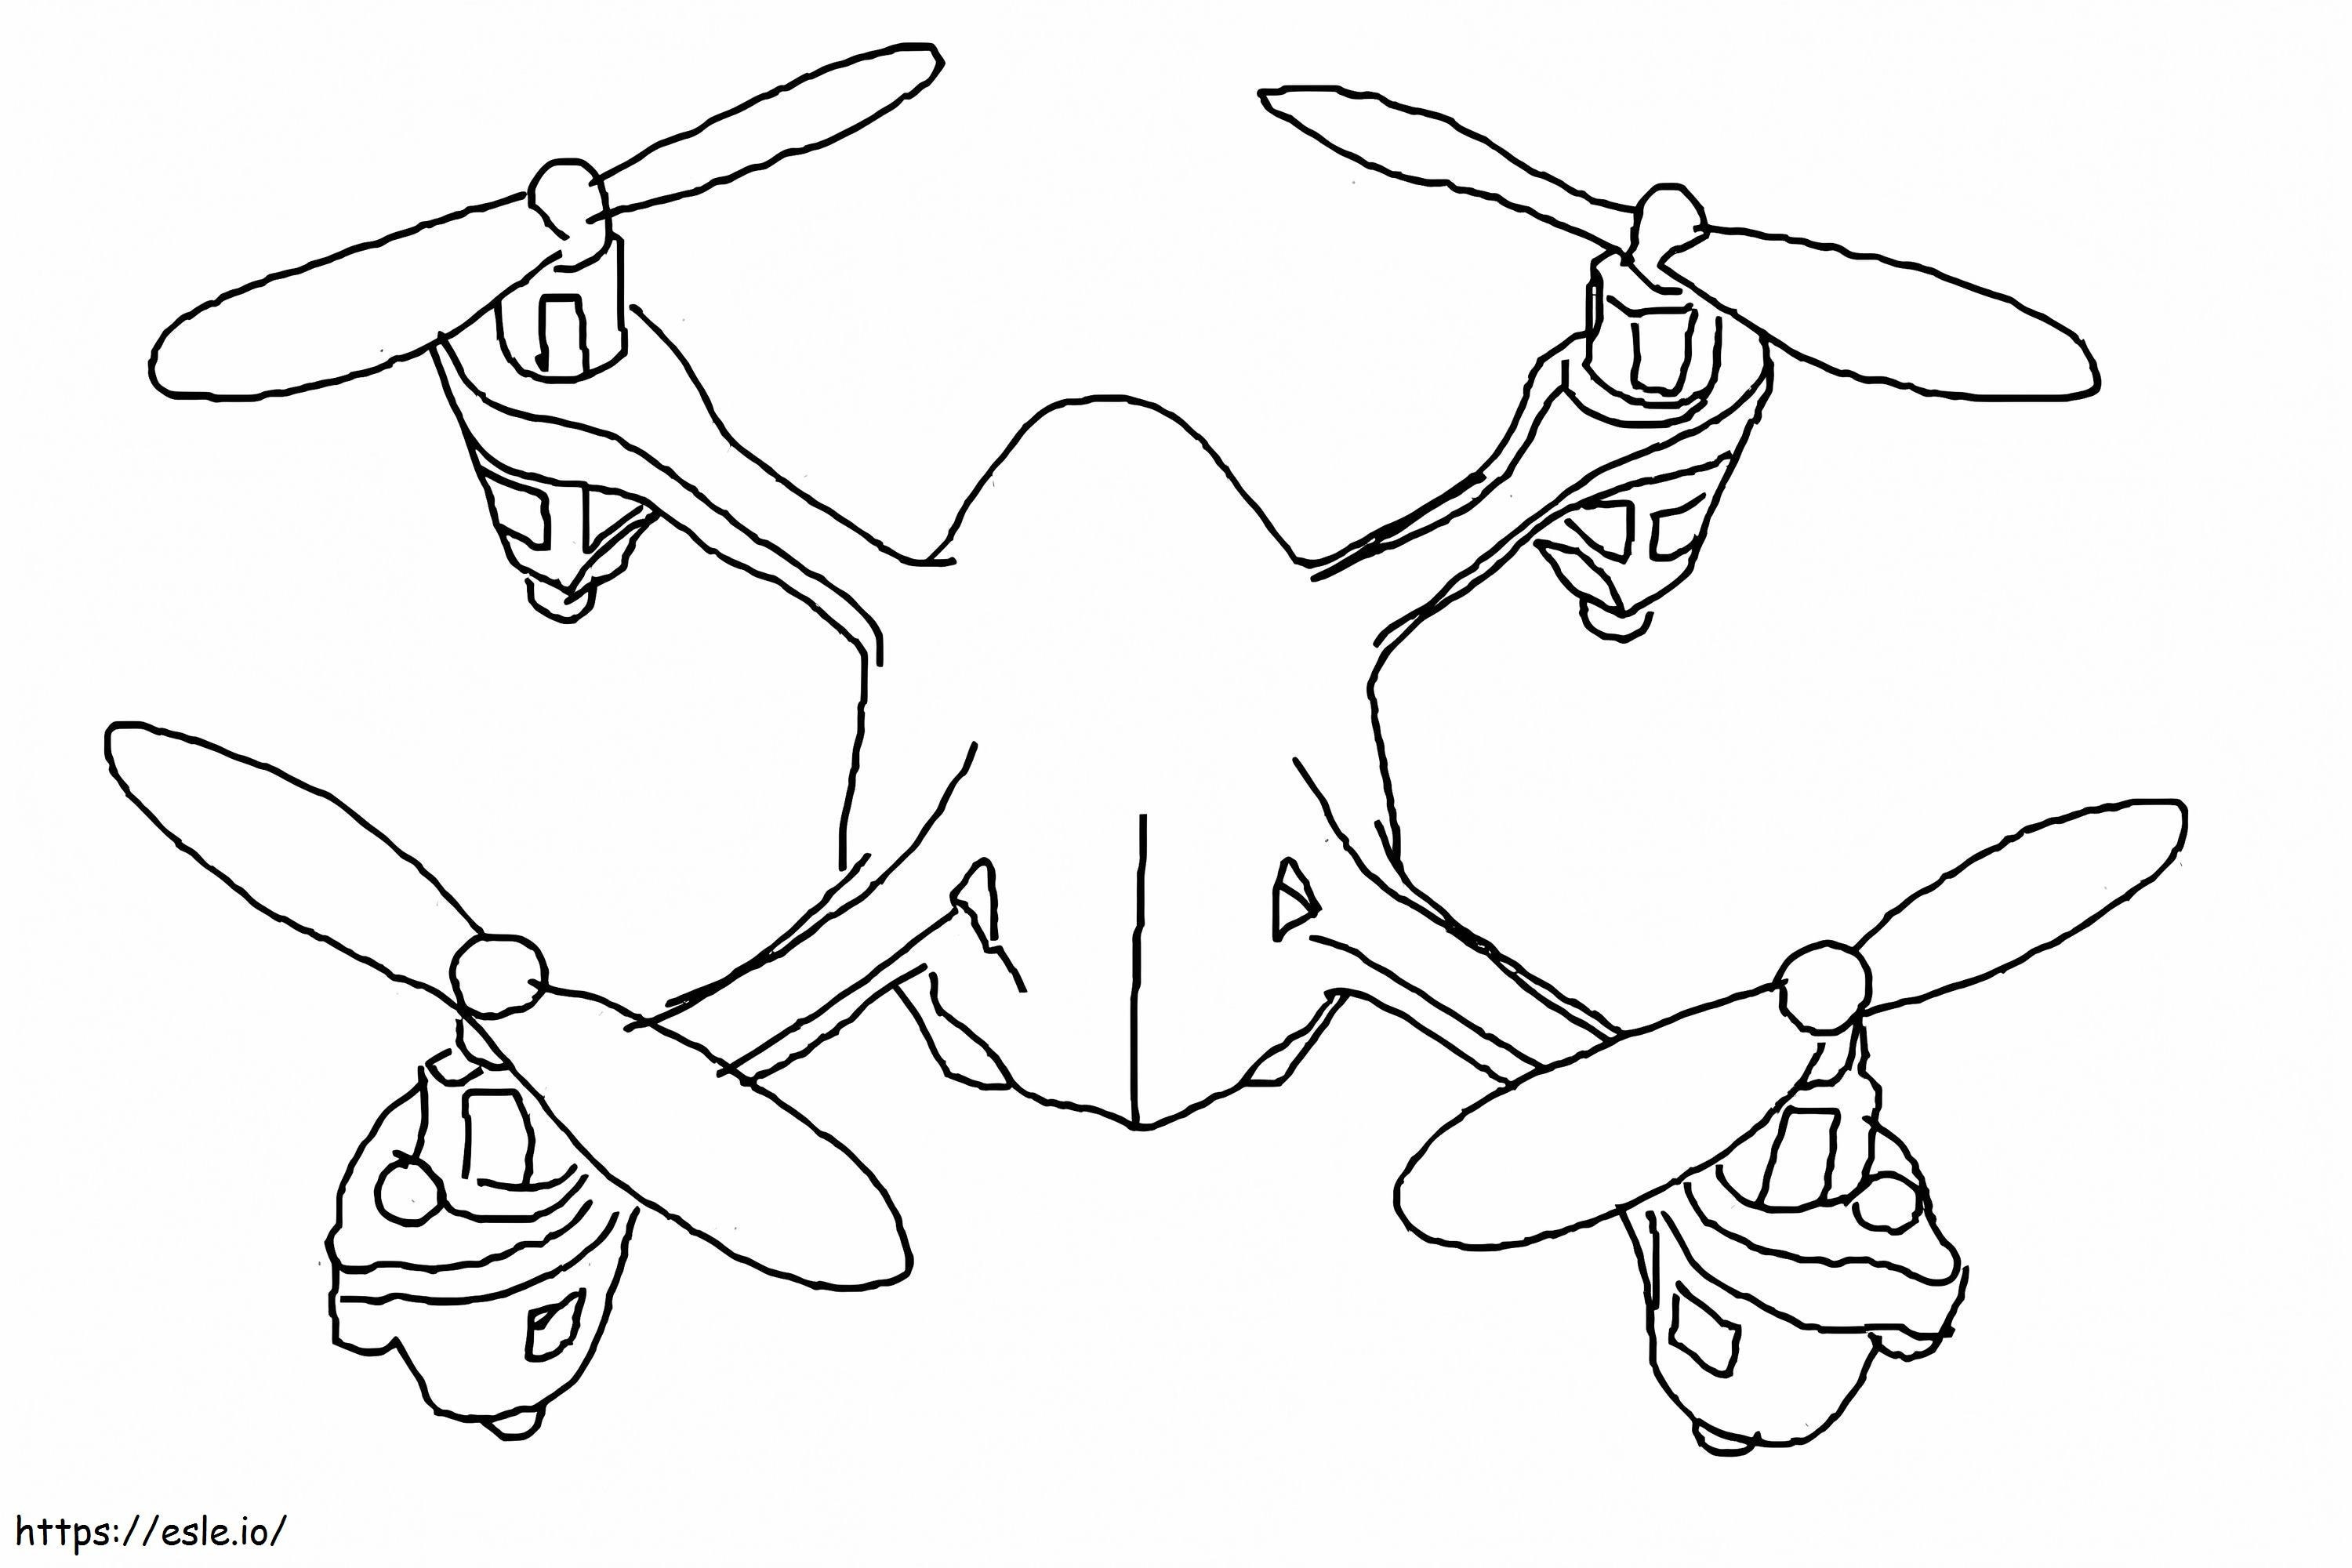 Printable drone coloring page